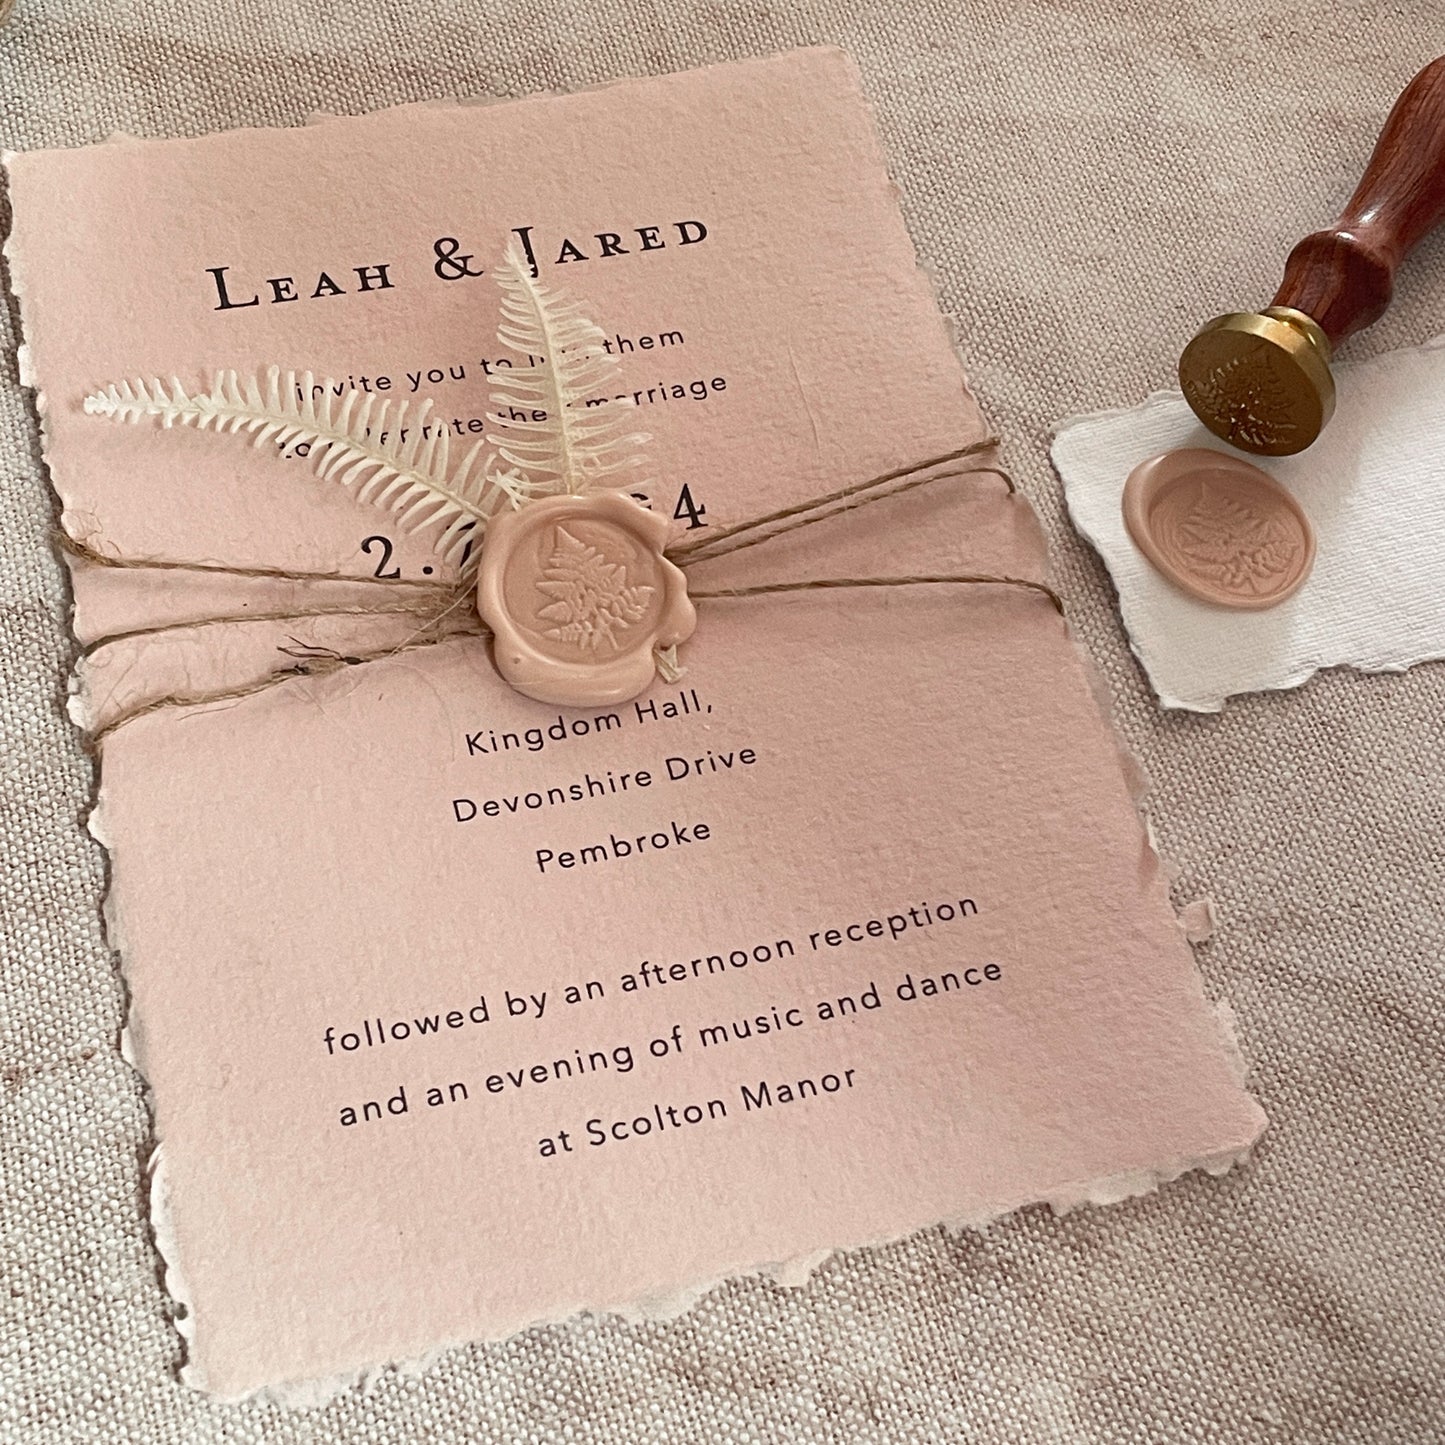 Easy DIY wedding invitation made from handmade paper, a fern leaf wax seal and jute string.  Eco friendly wedding invitations.  By The Natural Paper Company